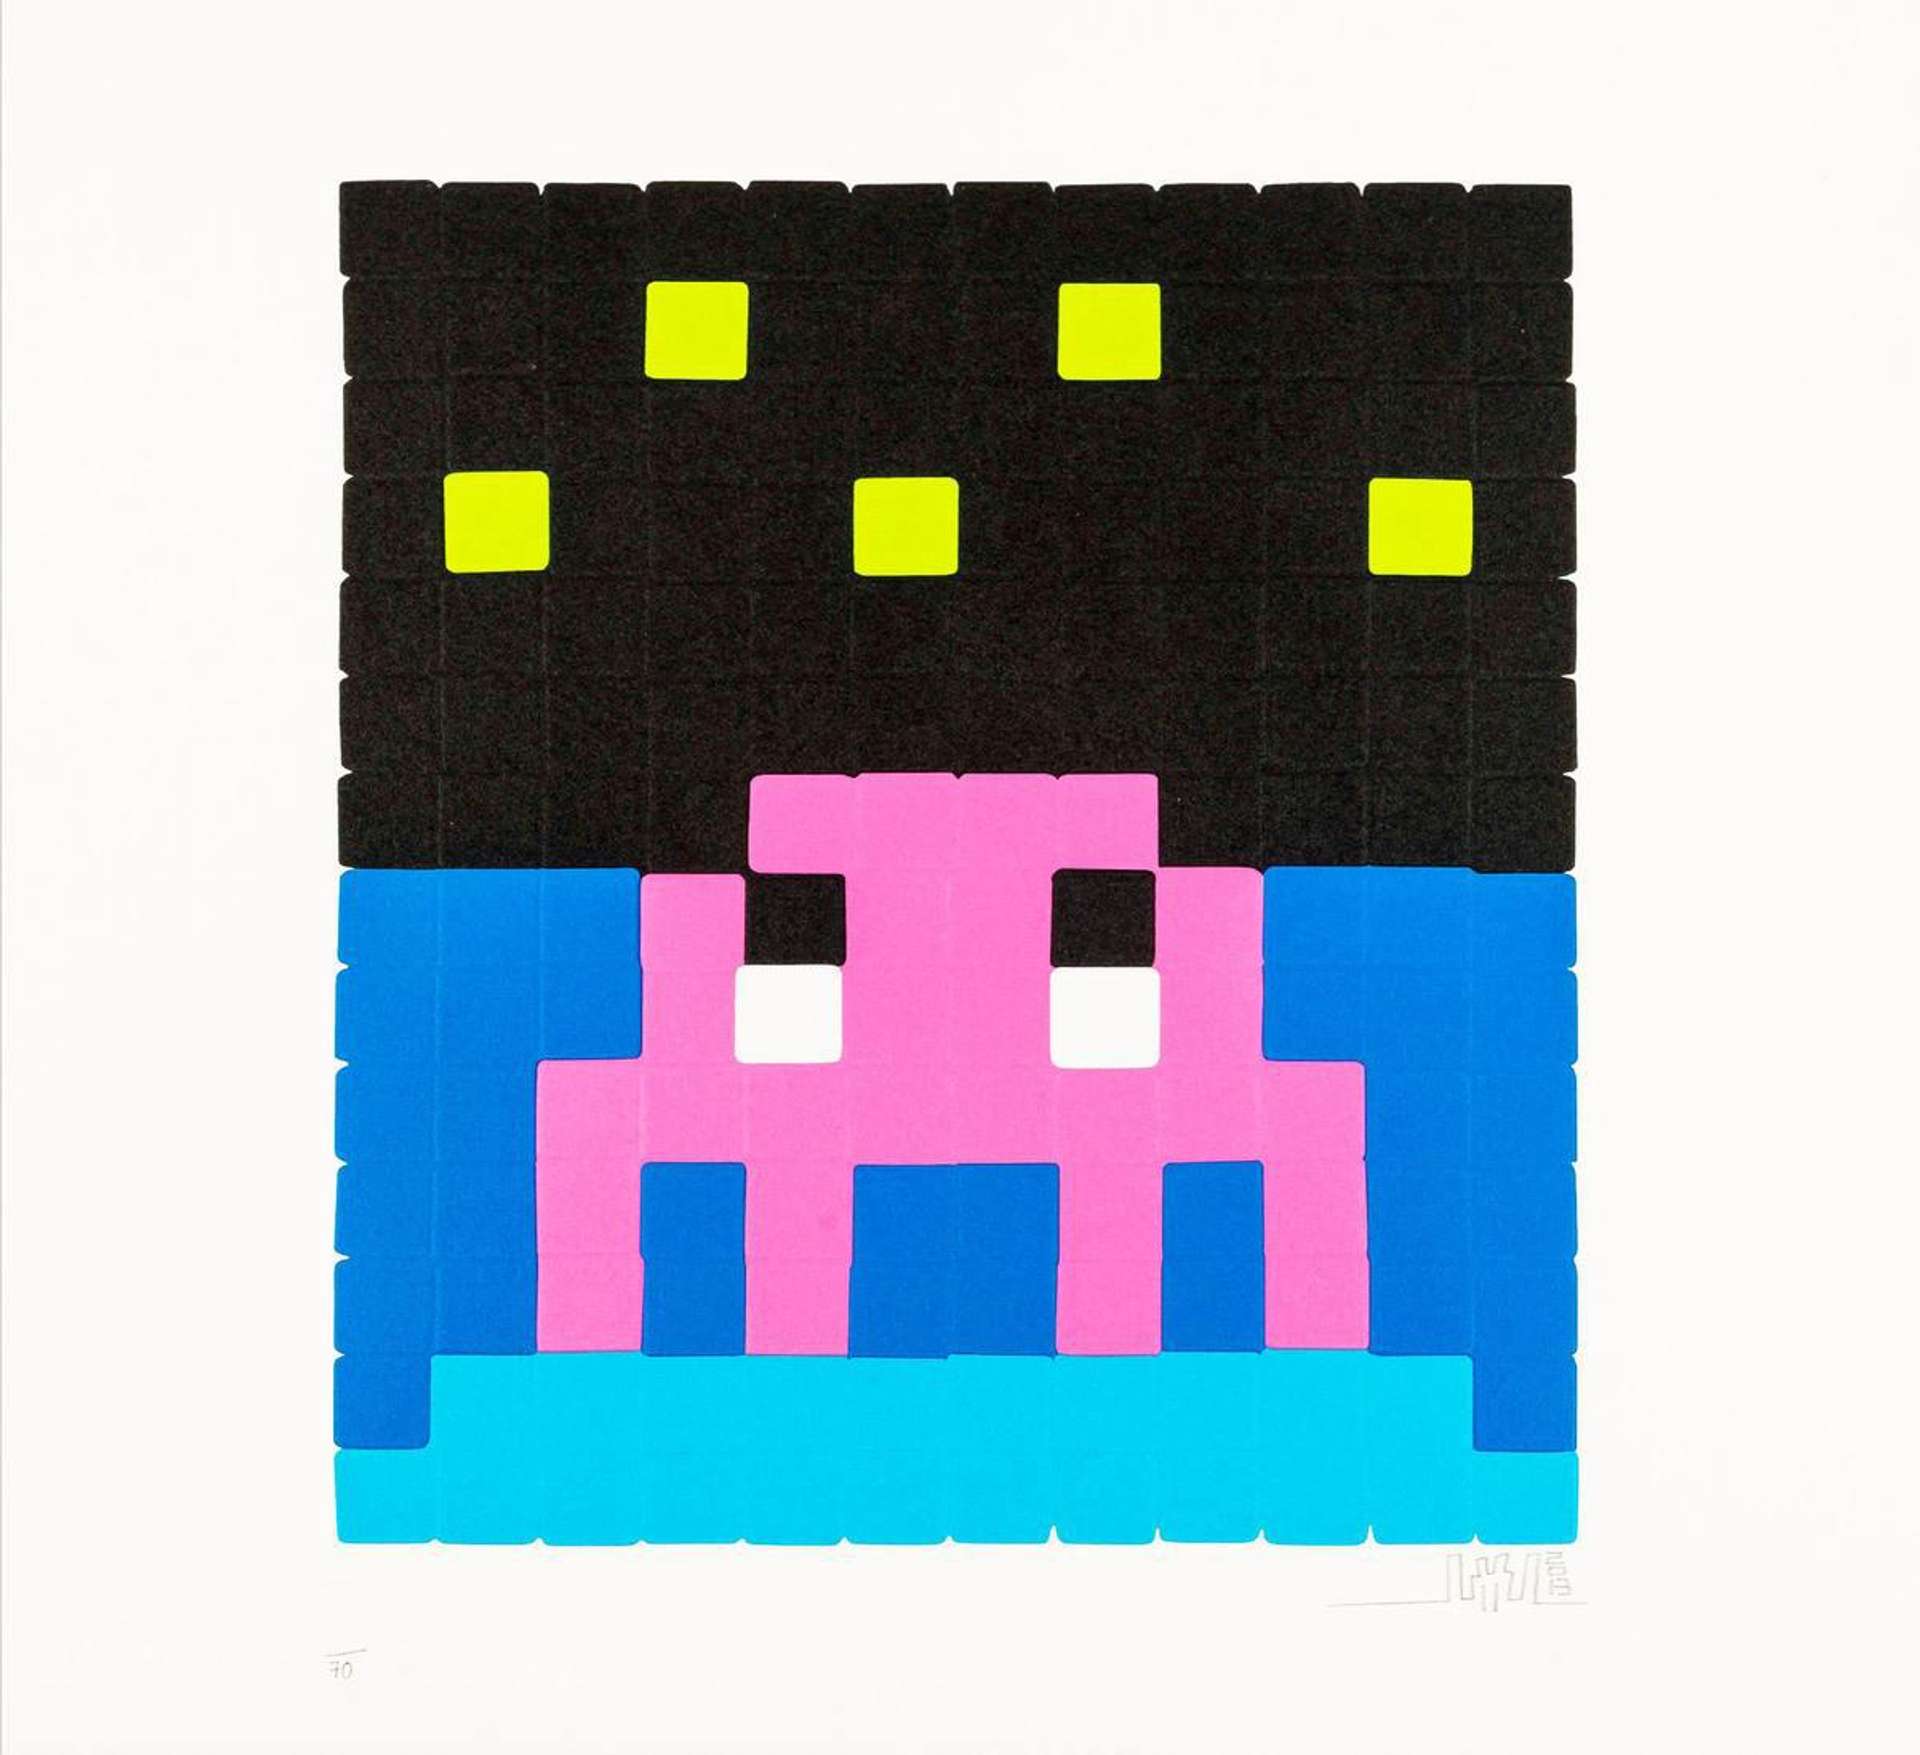 Black, blue and pink tiles create a pixellated mosaic in Invader’s signature style, paying homage to 80s 8-bit video games.